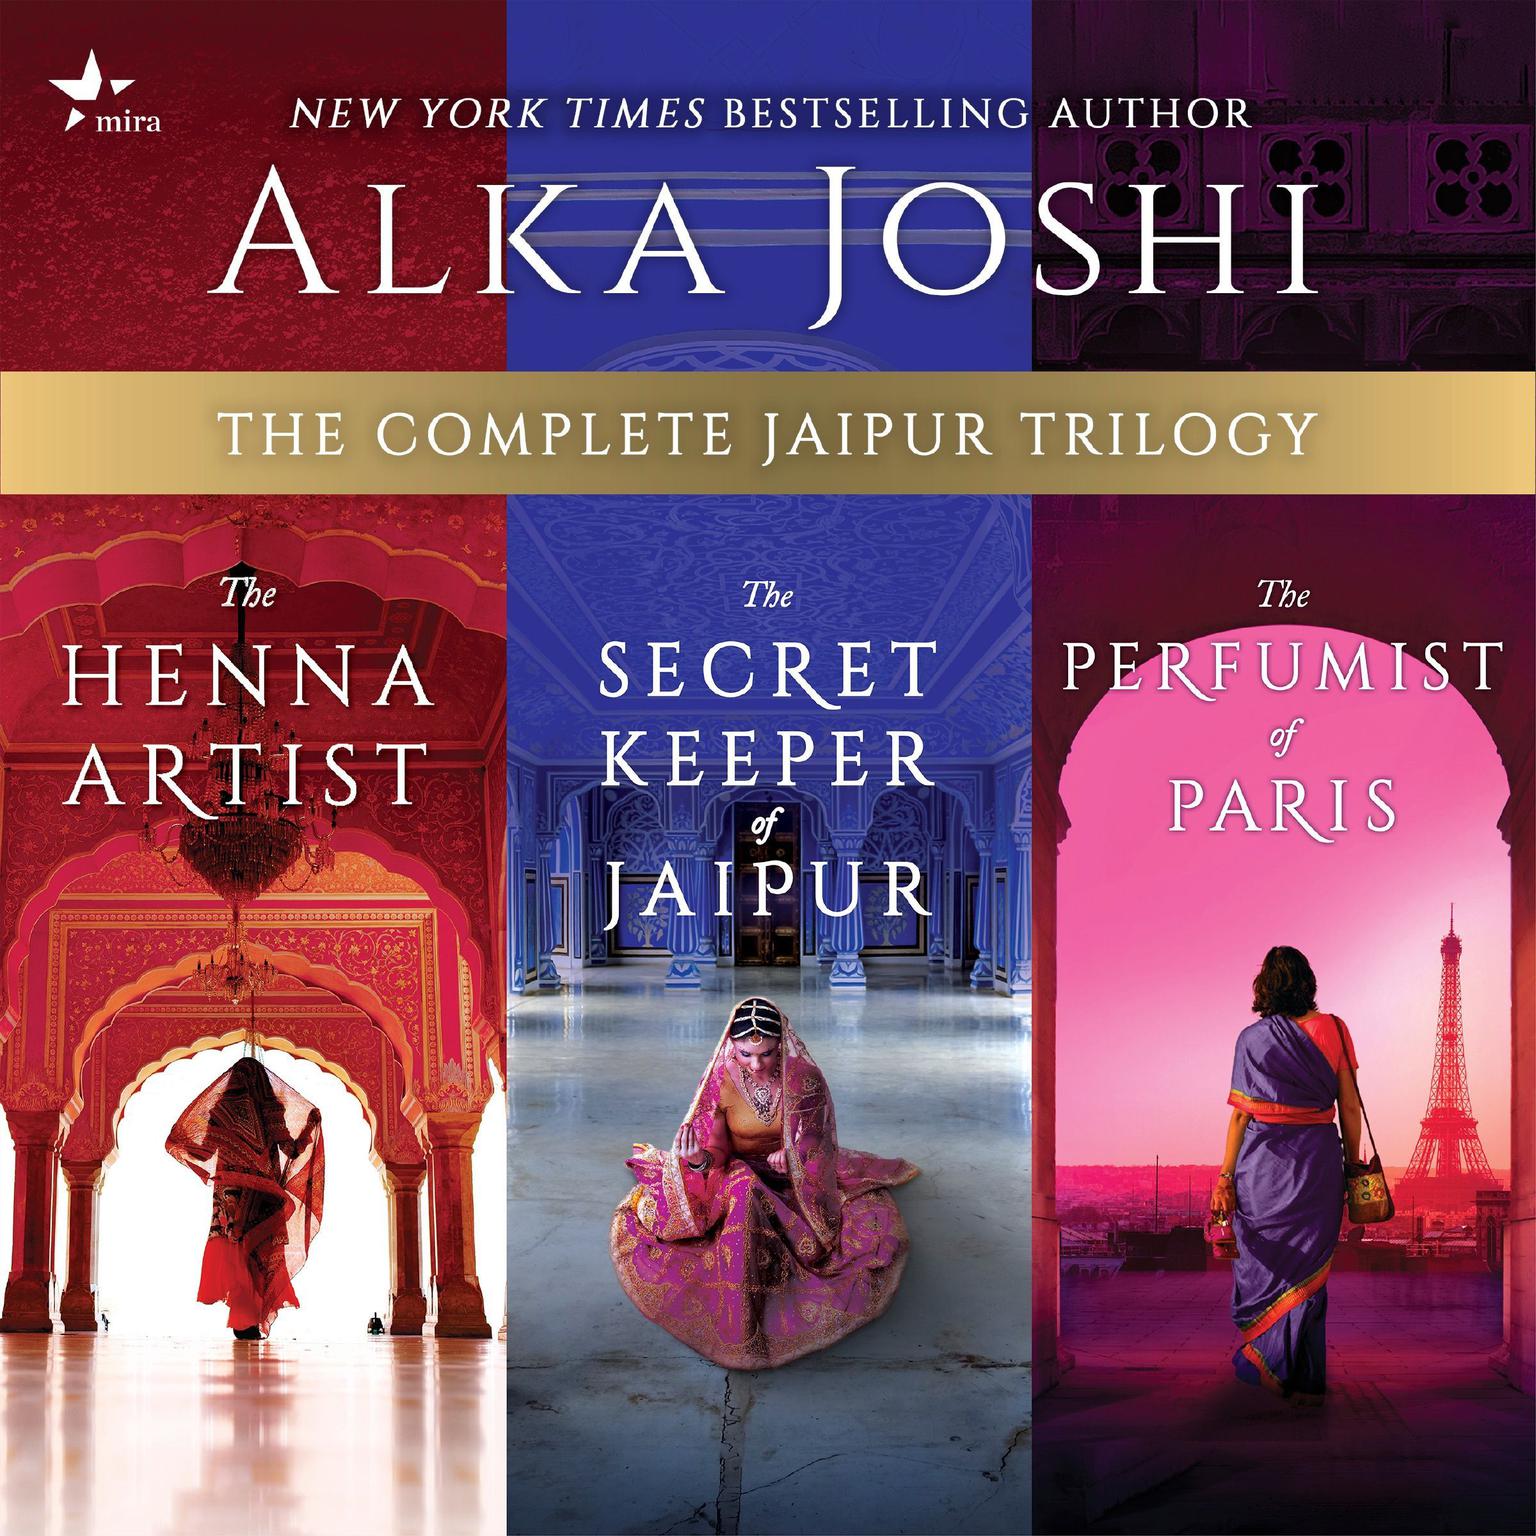 The Complete Jaipur Trilogy: The Henna Artist, The Secret Keeper of Jaipur, and The Perfumist of Paris Audiobook, by Alka Joshi